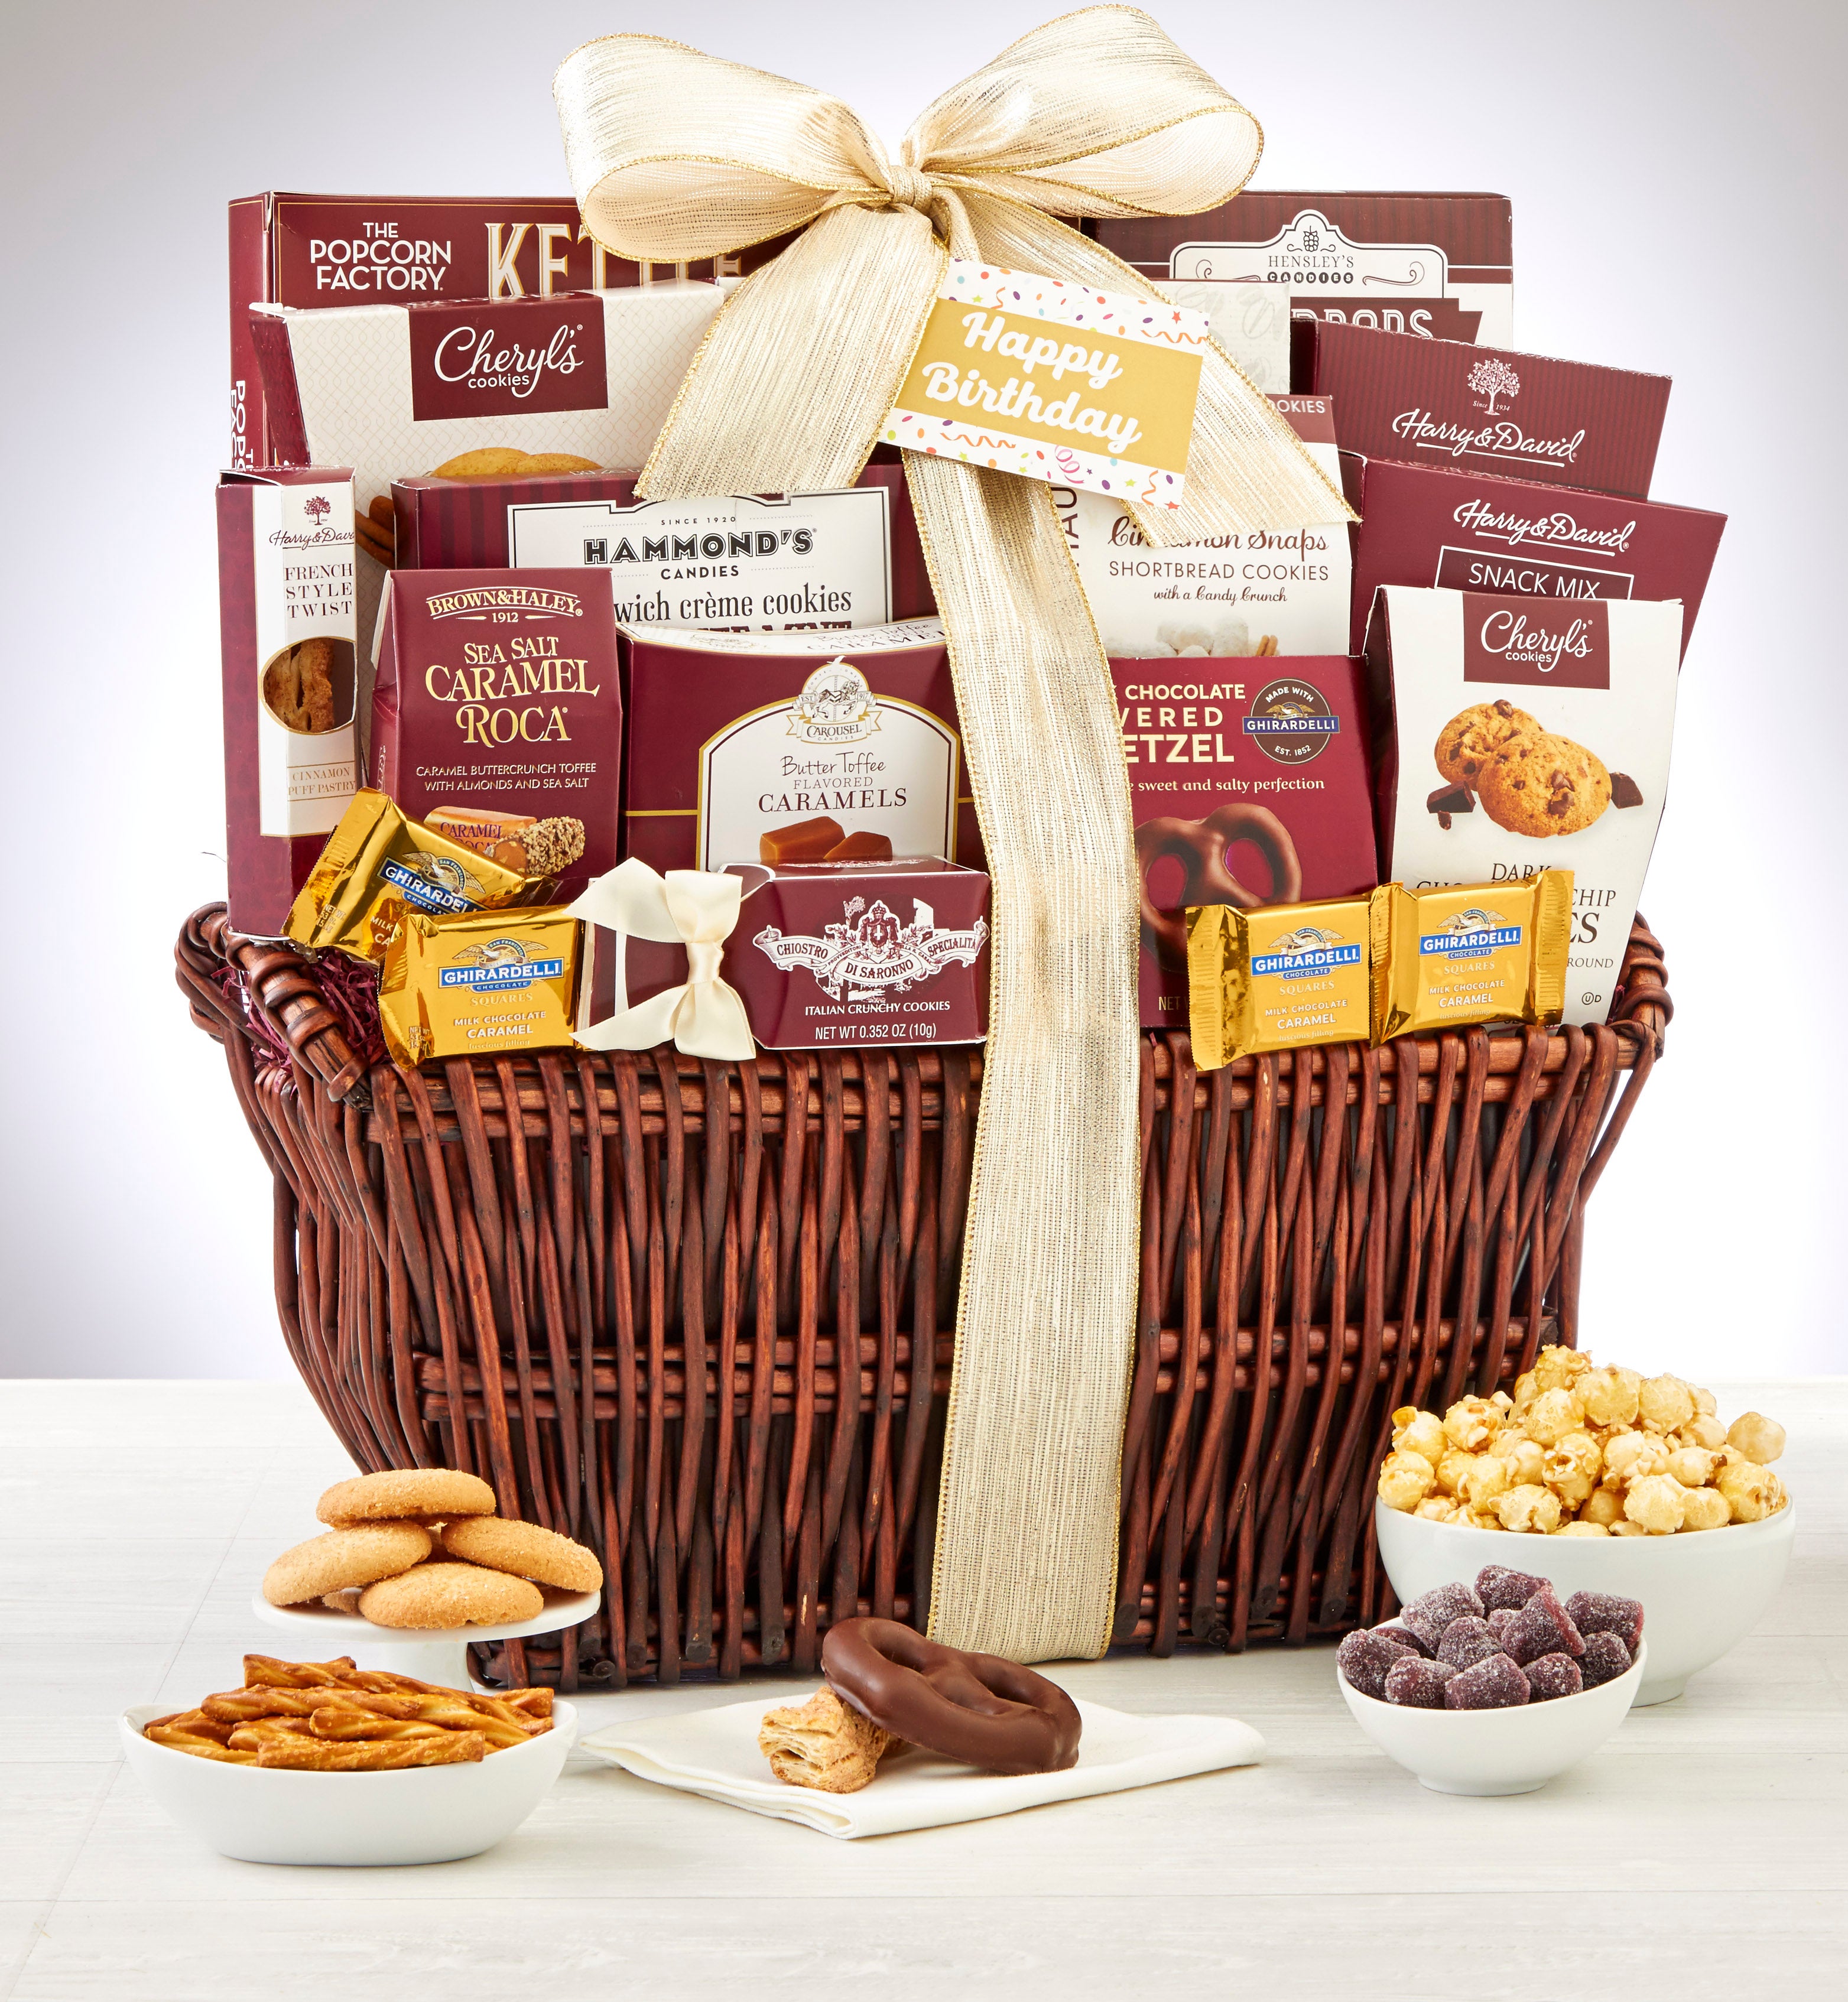 CD871318 Gourmet Choice Gift Basket for Birthday and personalized card mailed seperately 